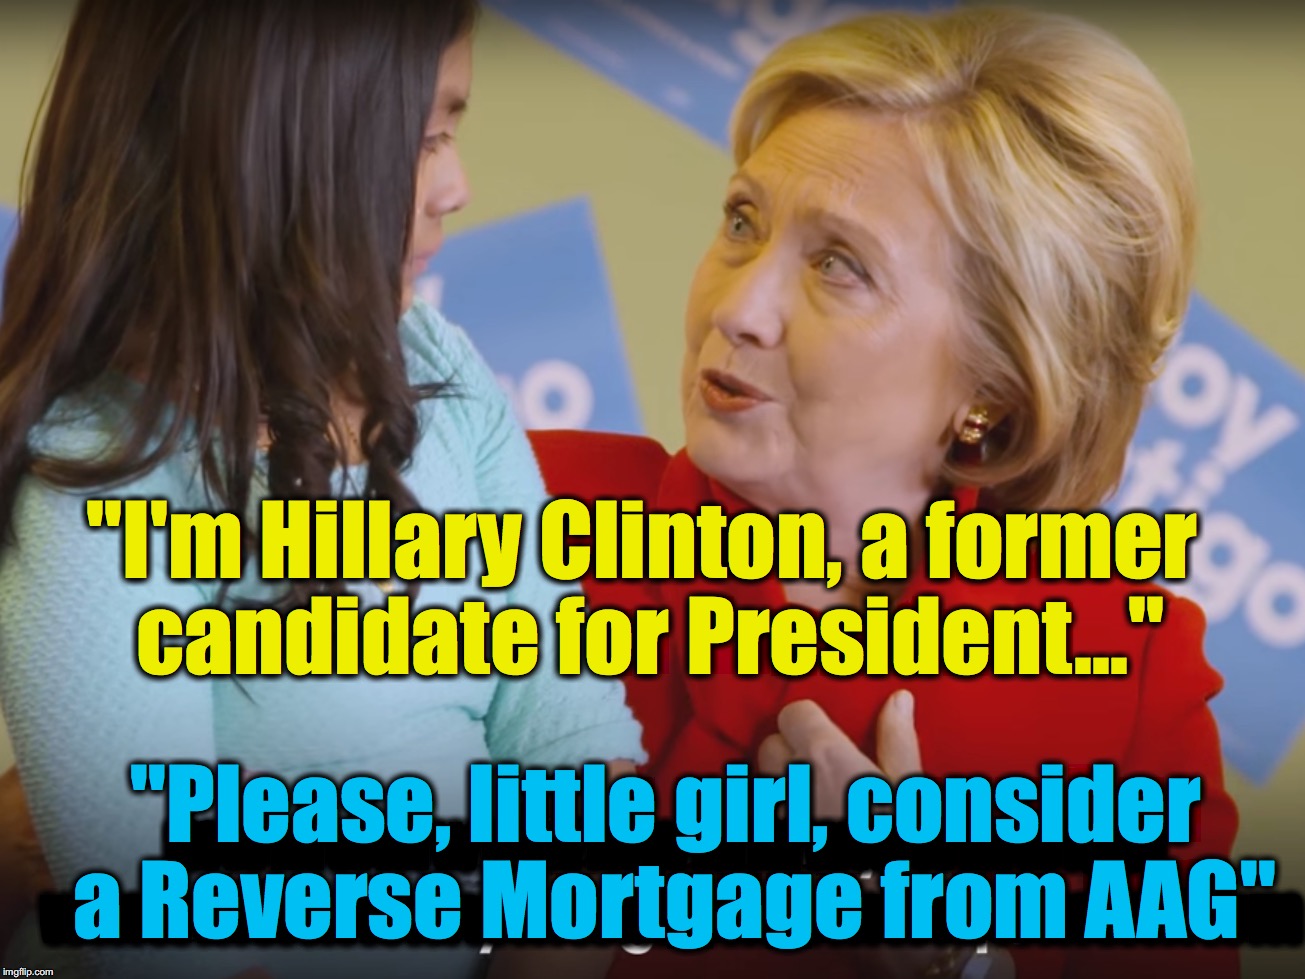 Hillary returns in 2018,... in her new job.... | "I'm Hillary Clinton, a former candidate for President..."; mwmwmwmwmwmmwmwmwmw wmwmwmwmwmwmwmwmwmwmwmwm; "Please, little girl, consider a Reverse Mortgage from AAG" | image tagged in hillary clinton,commercials | made w/ Imgflip meme maker